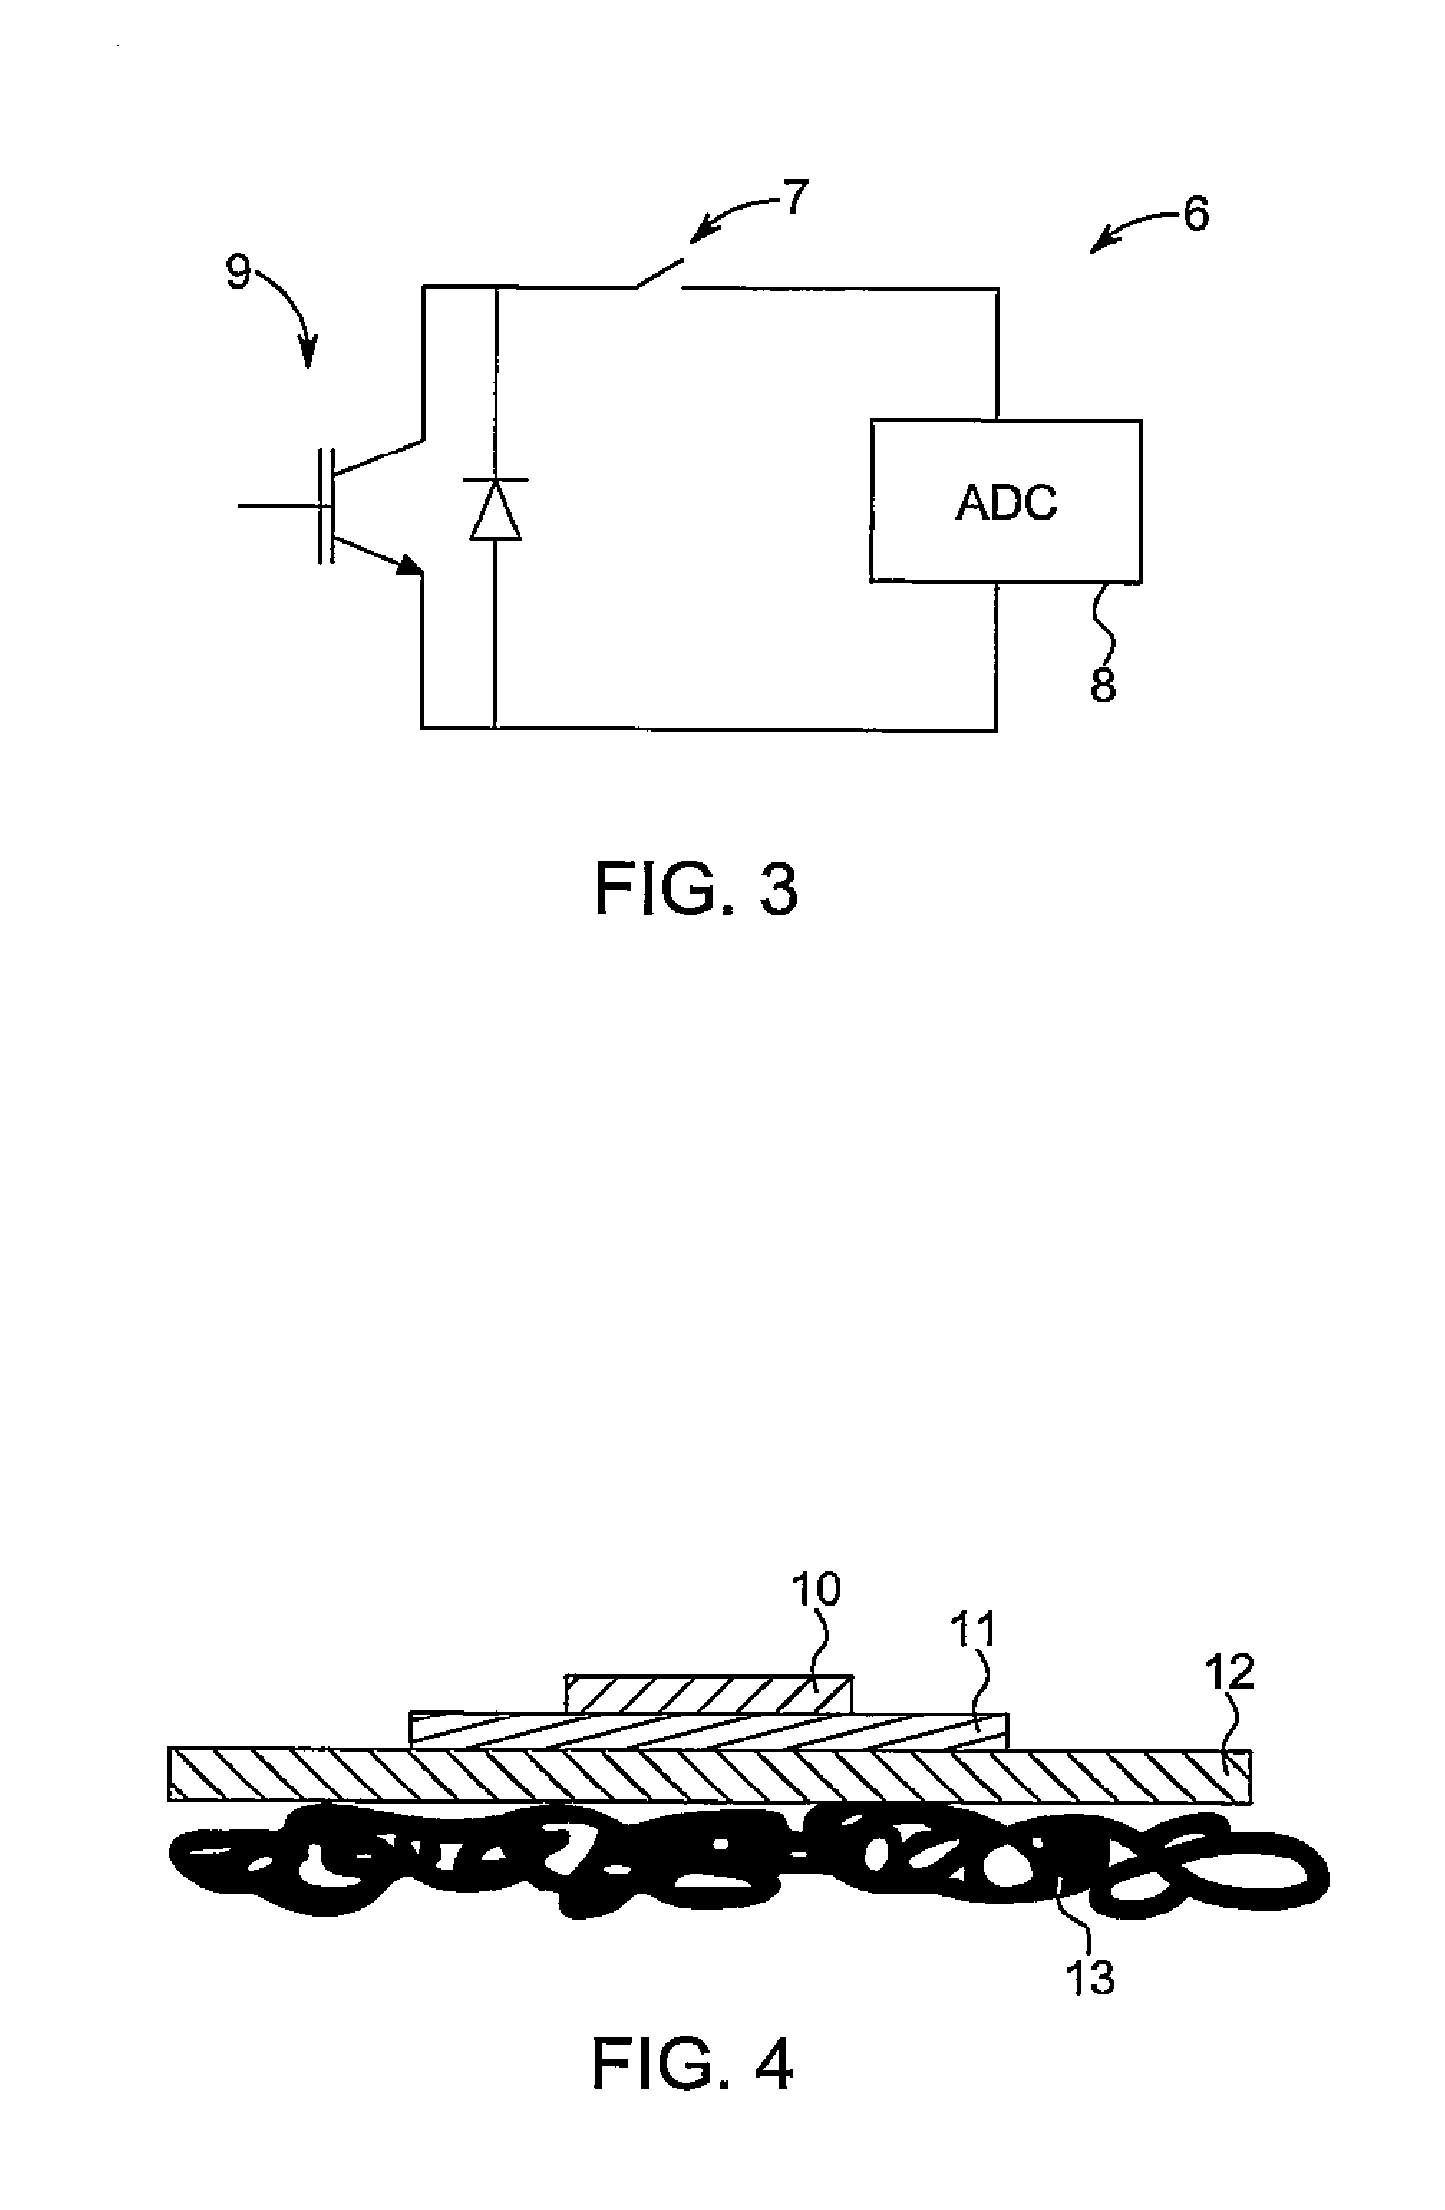 Method for estimating the end of lifetime for a power semiconductor device